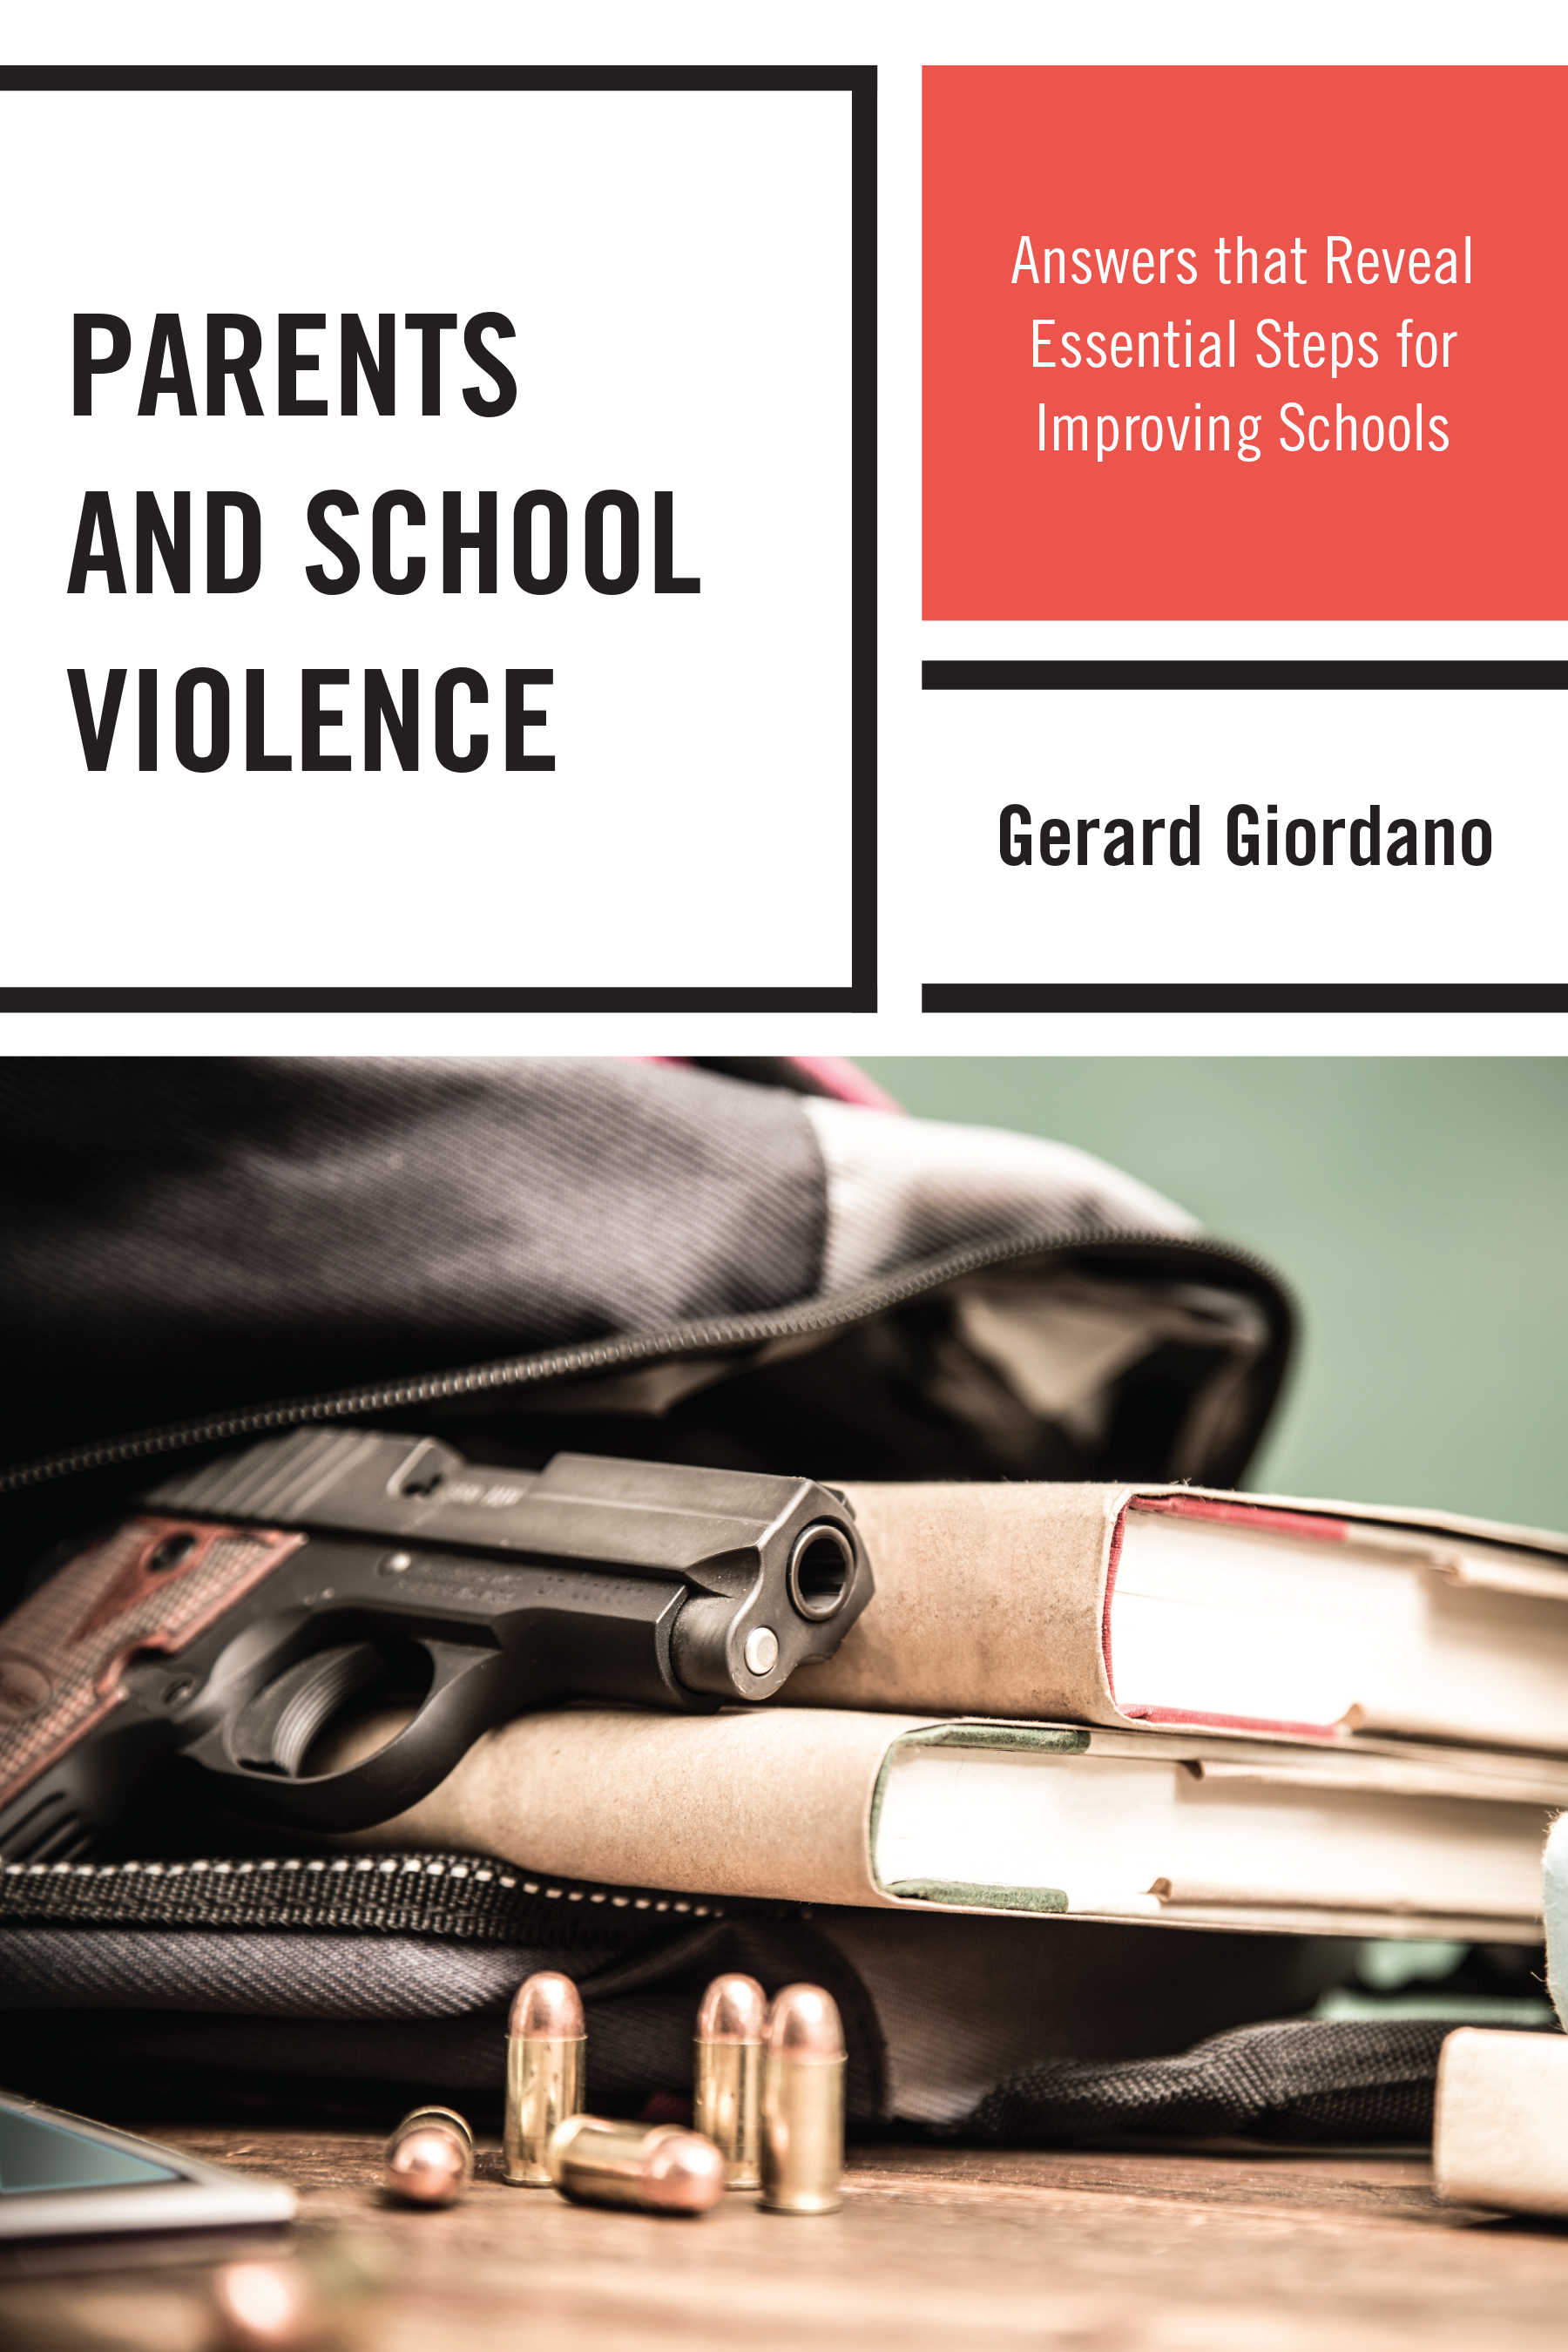 Parents and School Violence: Answers that Reveal Essential Steps for Improving Schools